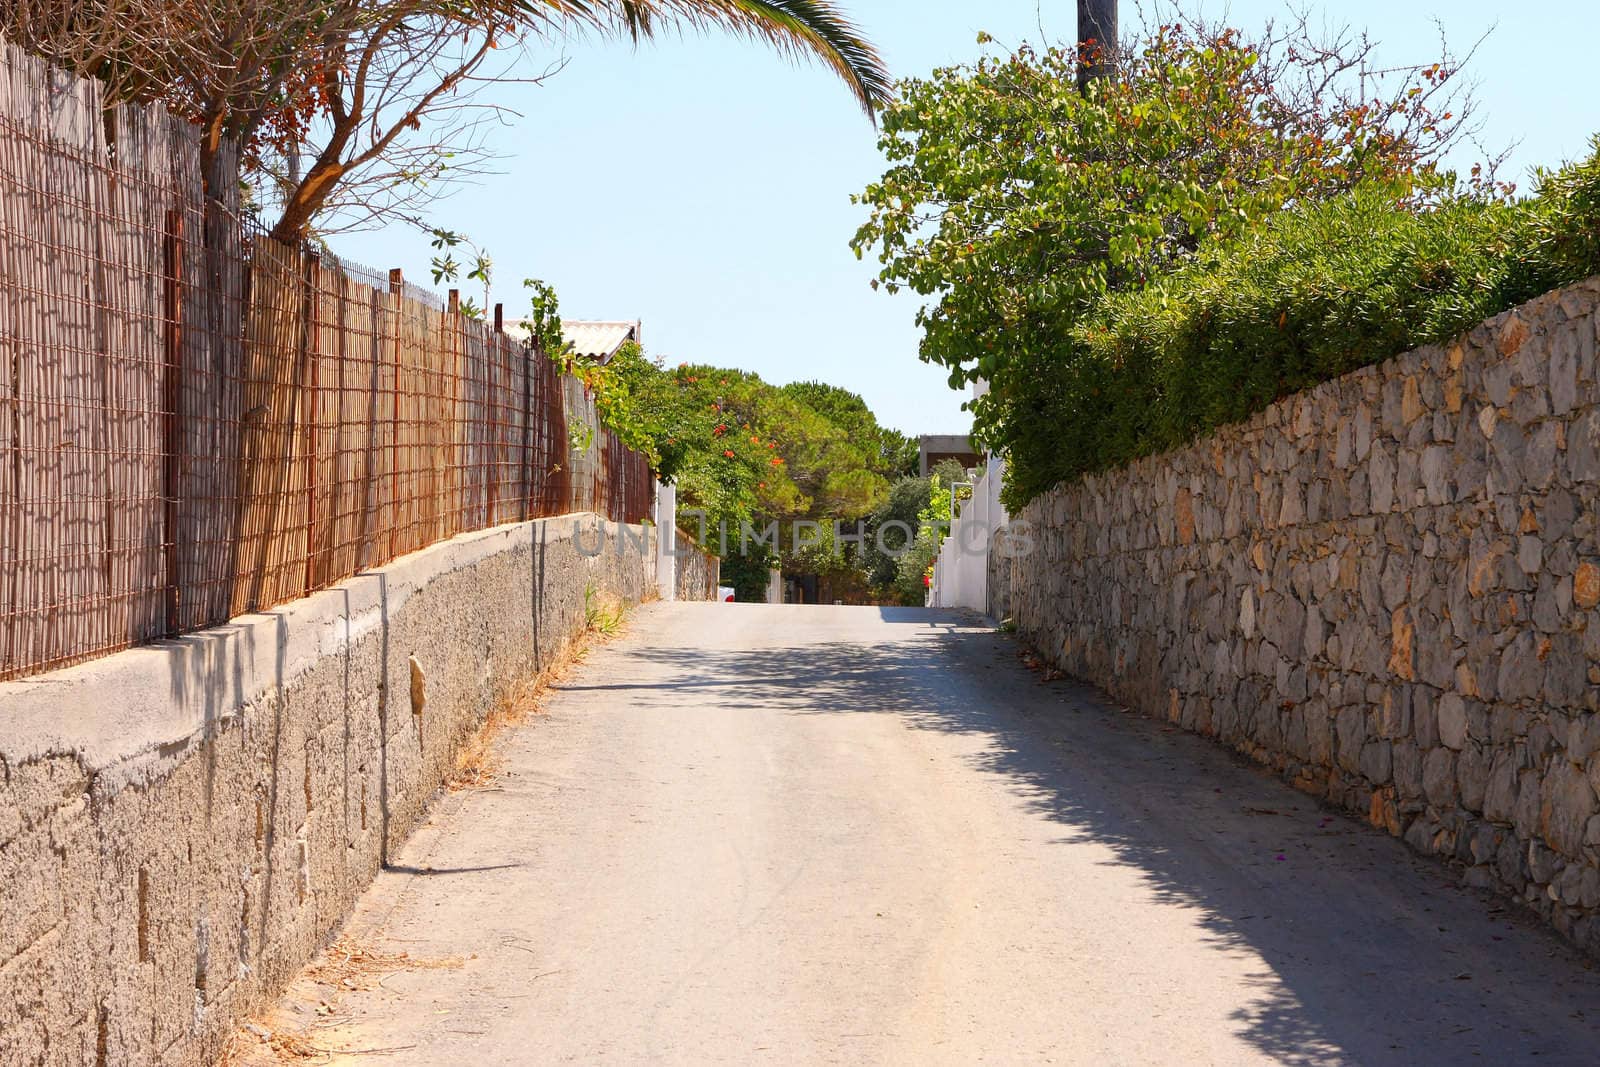 A narrow street in the village on the island of Crete. Greece by alexanderd